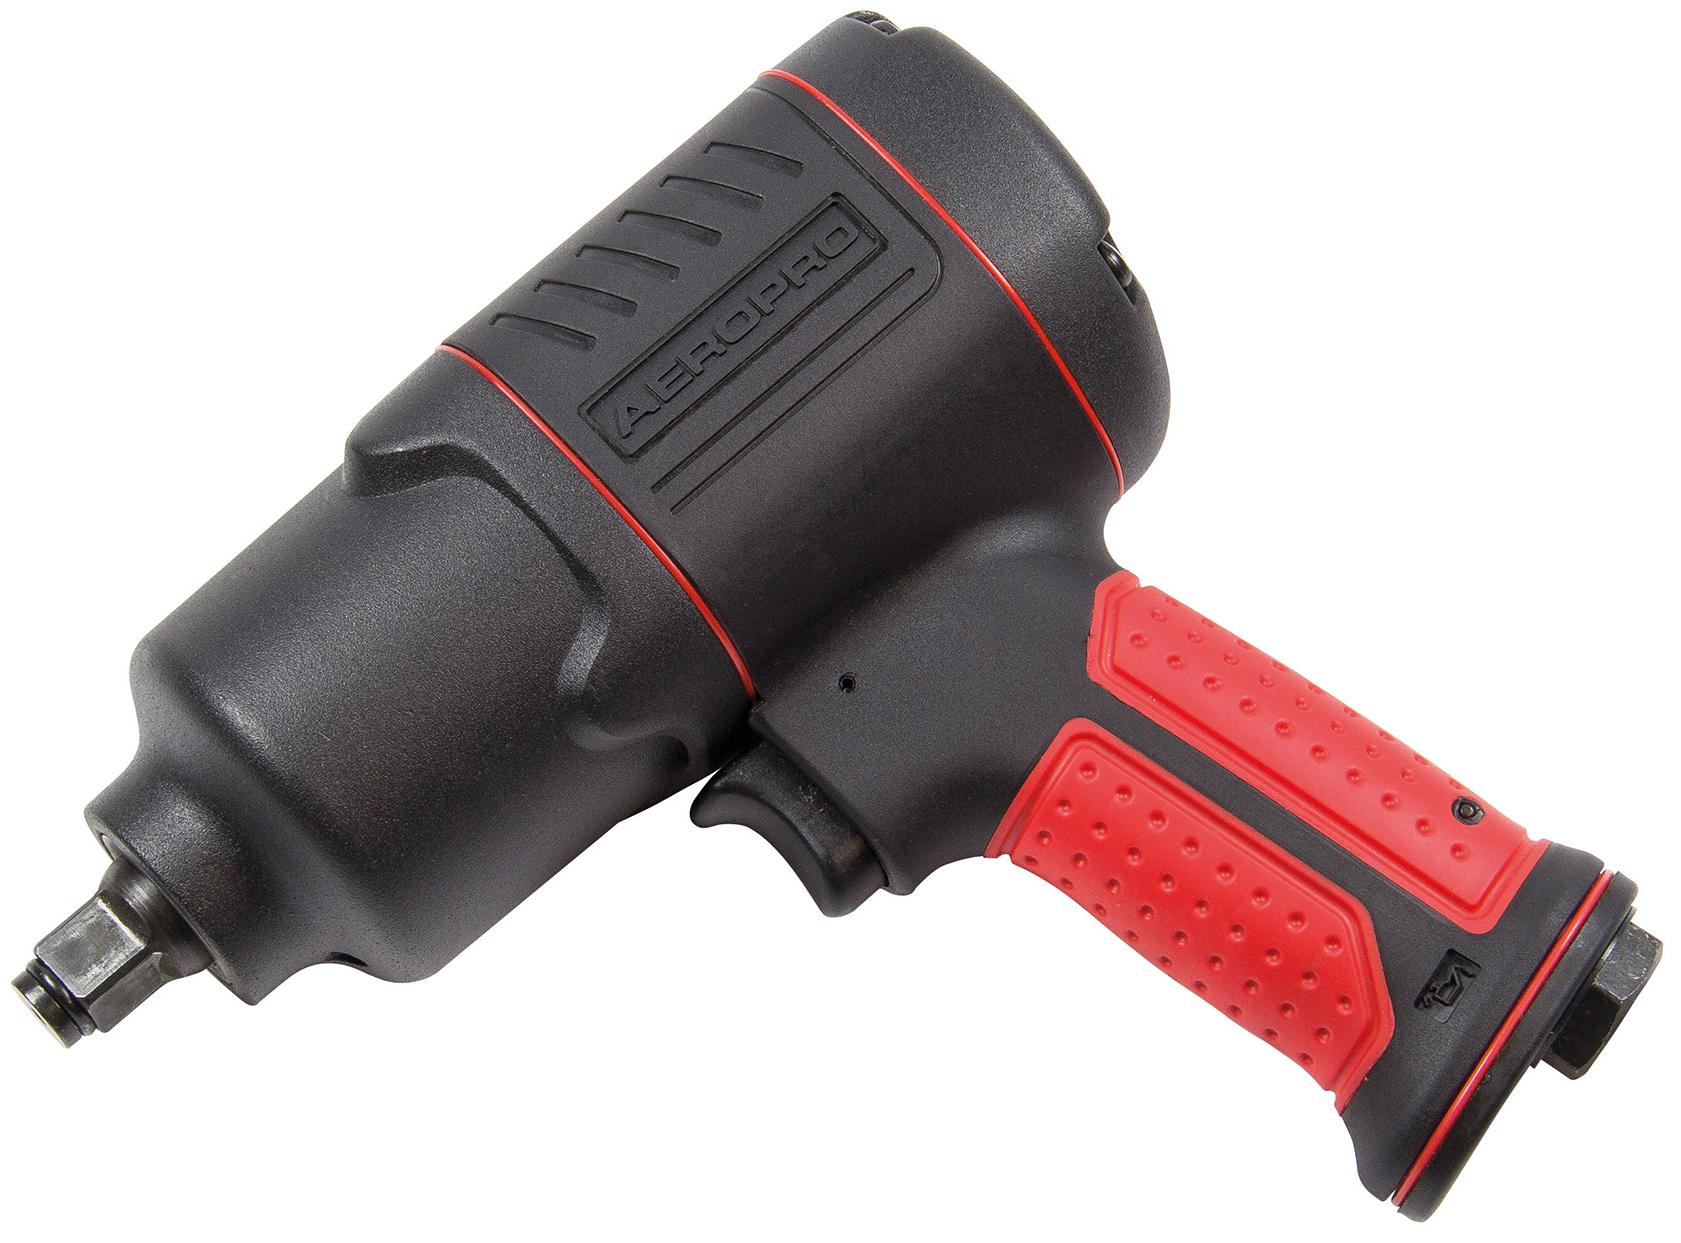 Sip Composite 1/2 Inch Air Impact Wrench